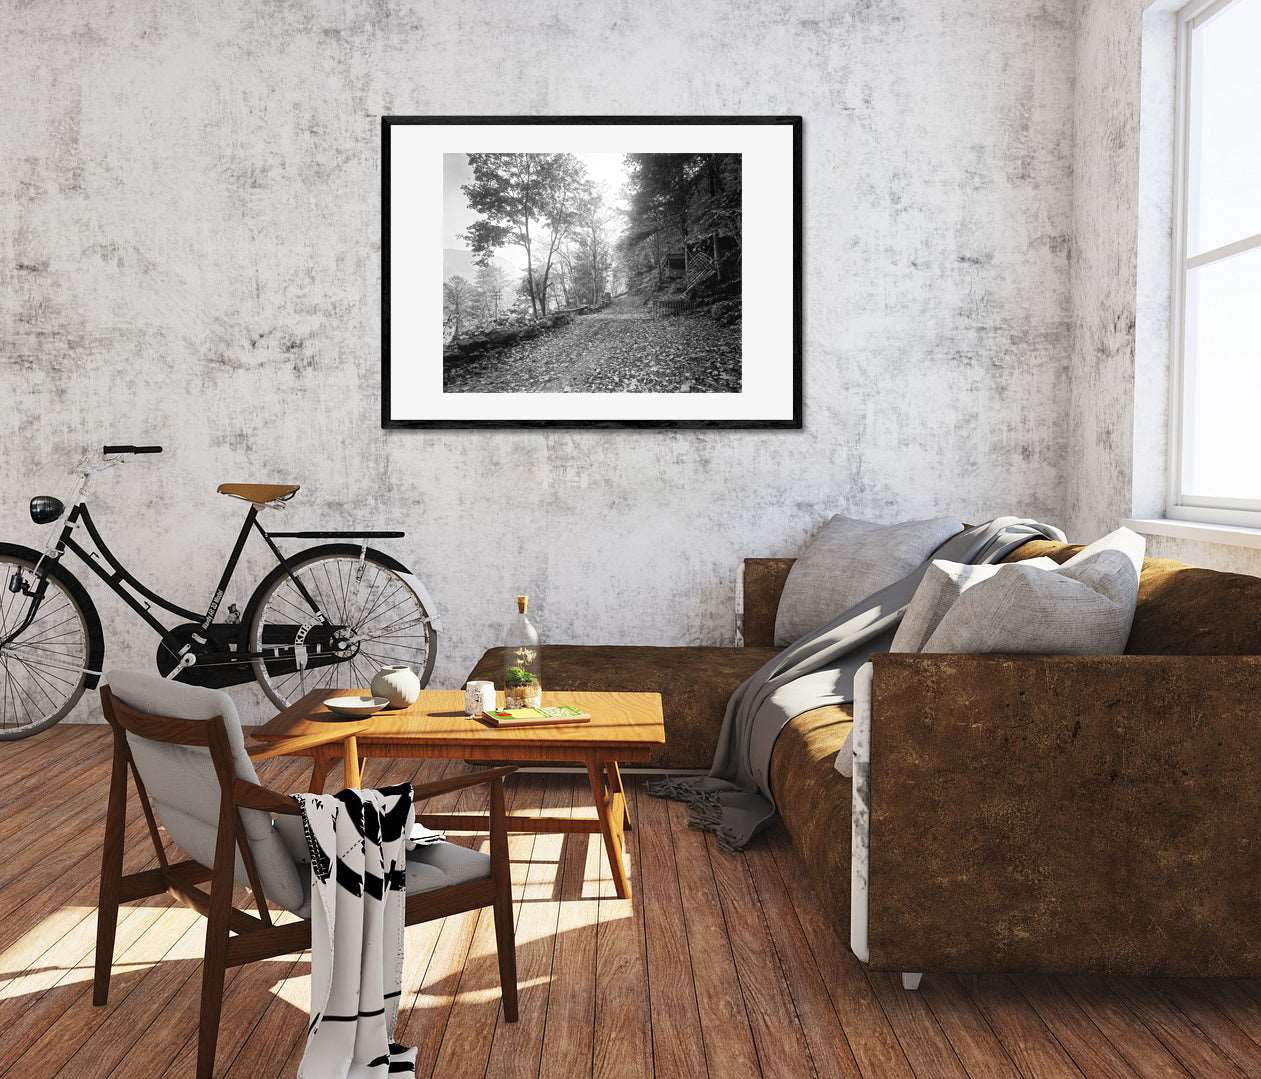 A rendering of a living room with a framed paper print on the wall, featuring a vintage photograph